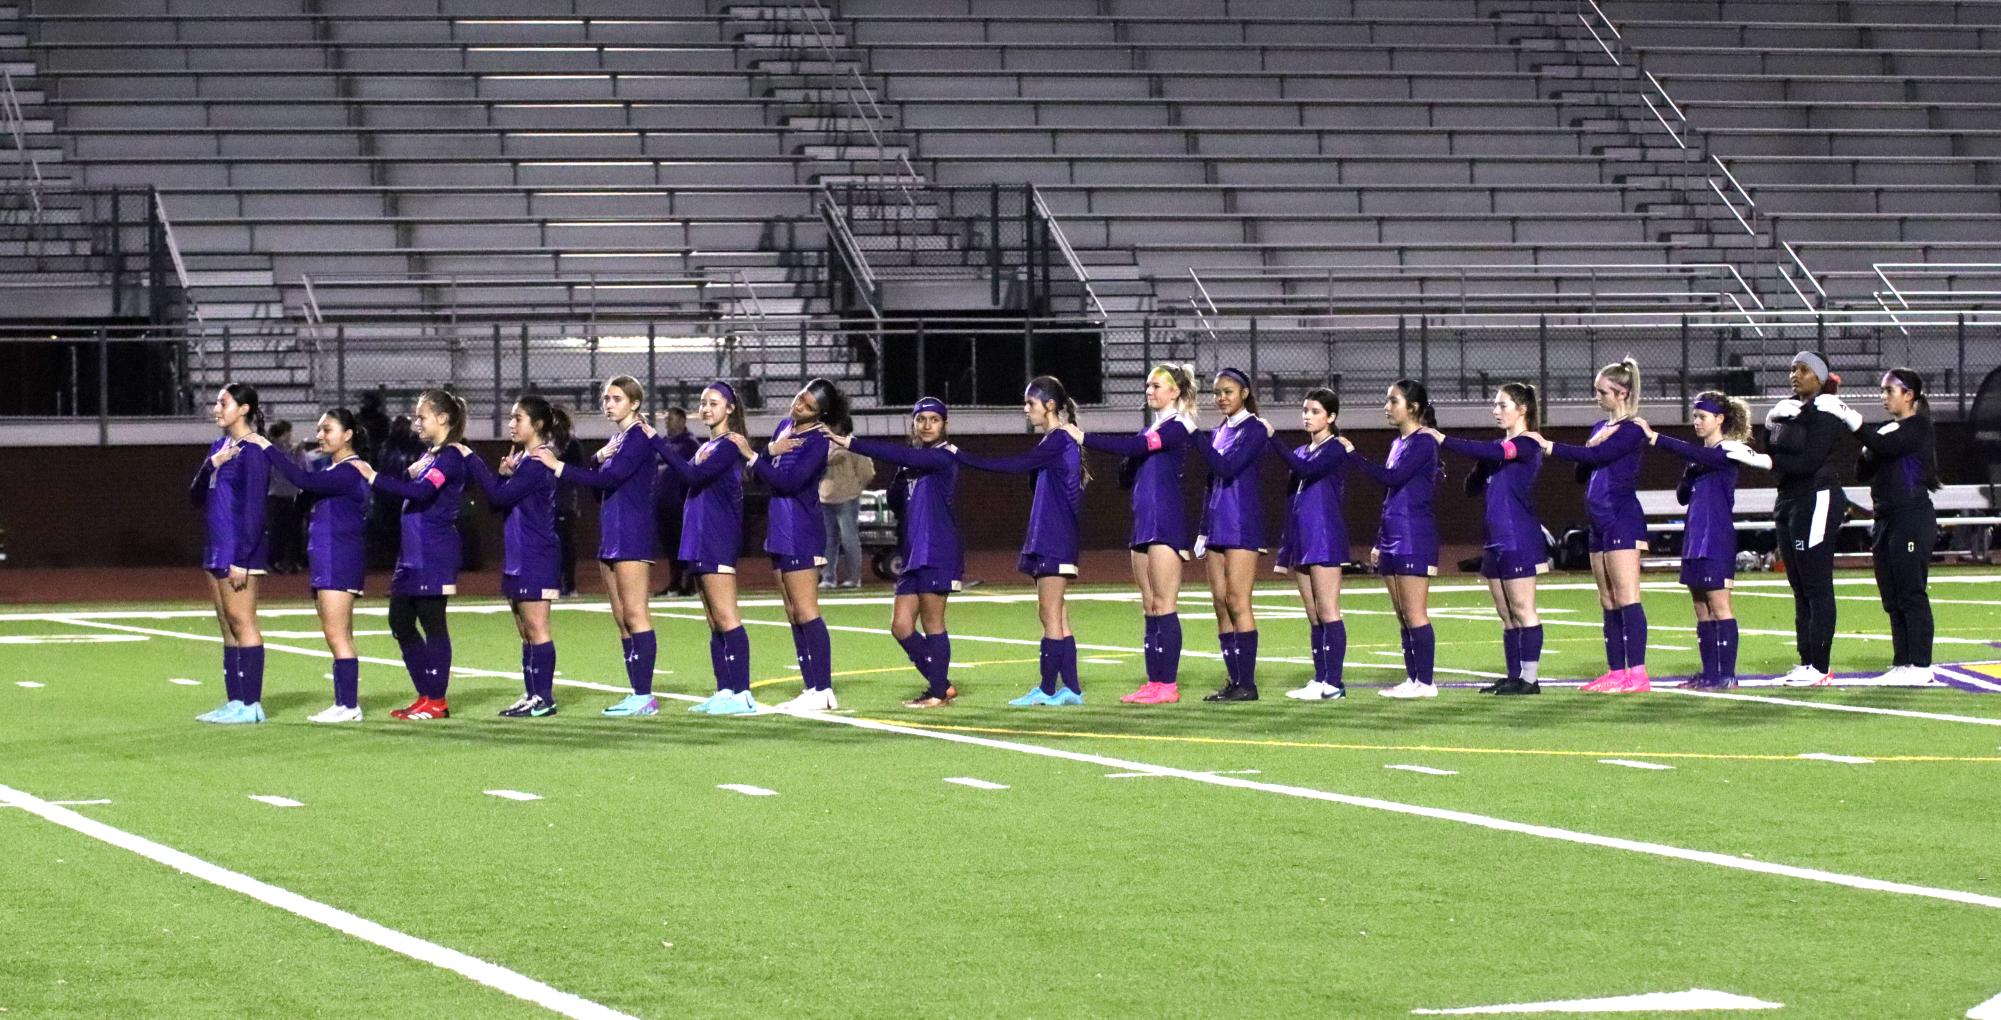 ‘AND THE ROCKETS RED GLARE’
As they stand for the national anthem, the Lady Rangers varsity soccer team surround the pitch at Ranger Stadium on Tuesday, Feb. 13.